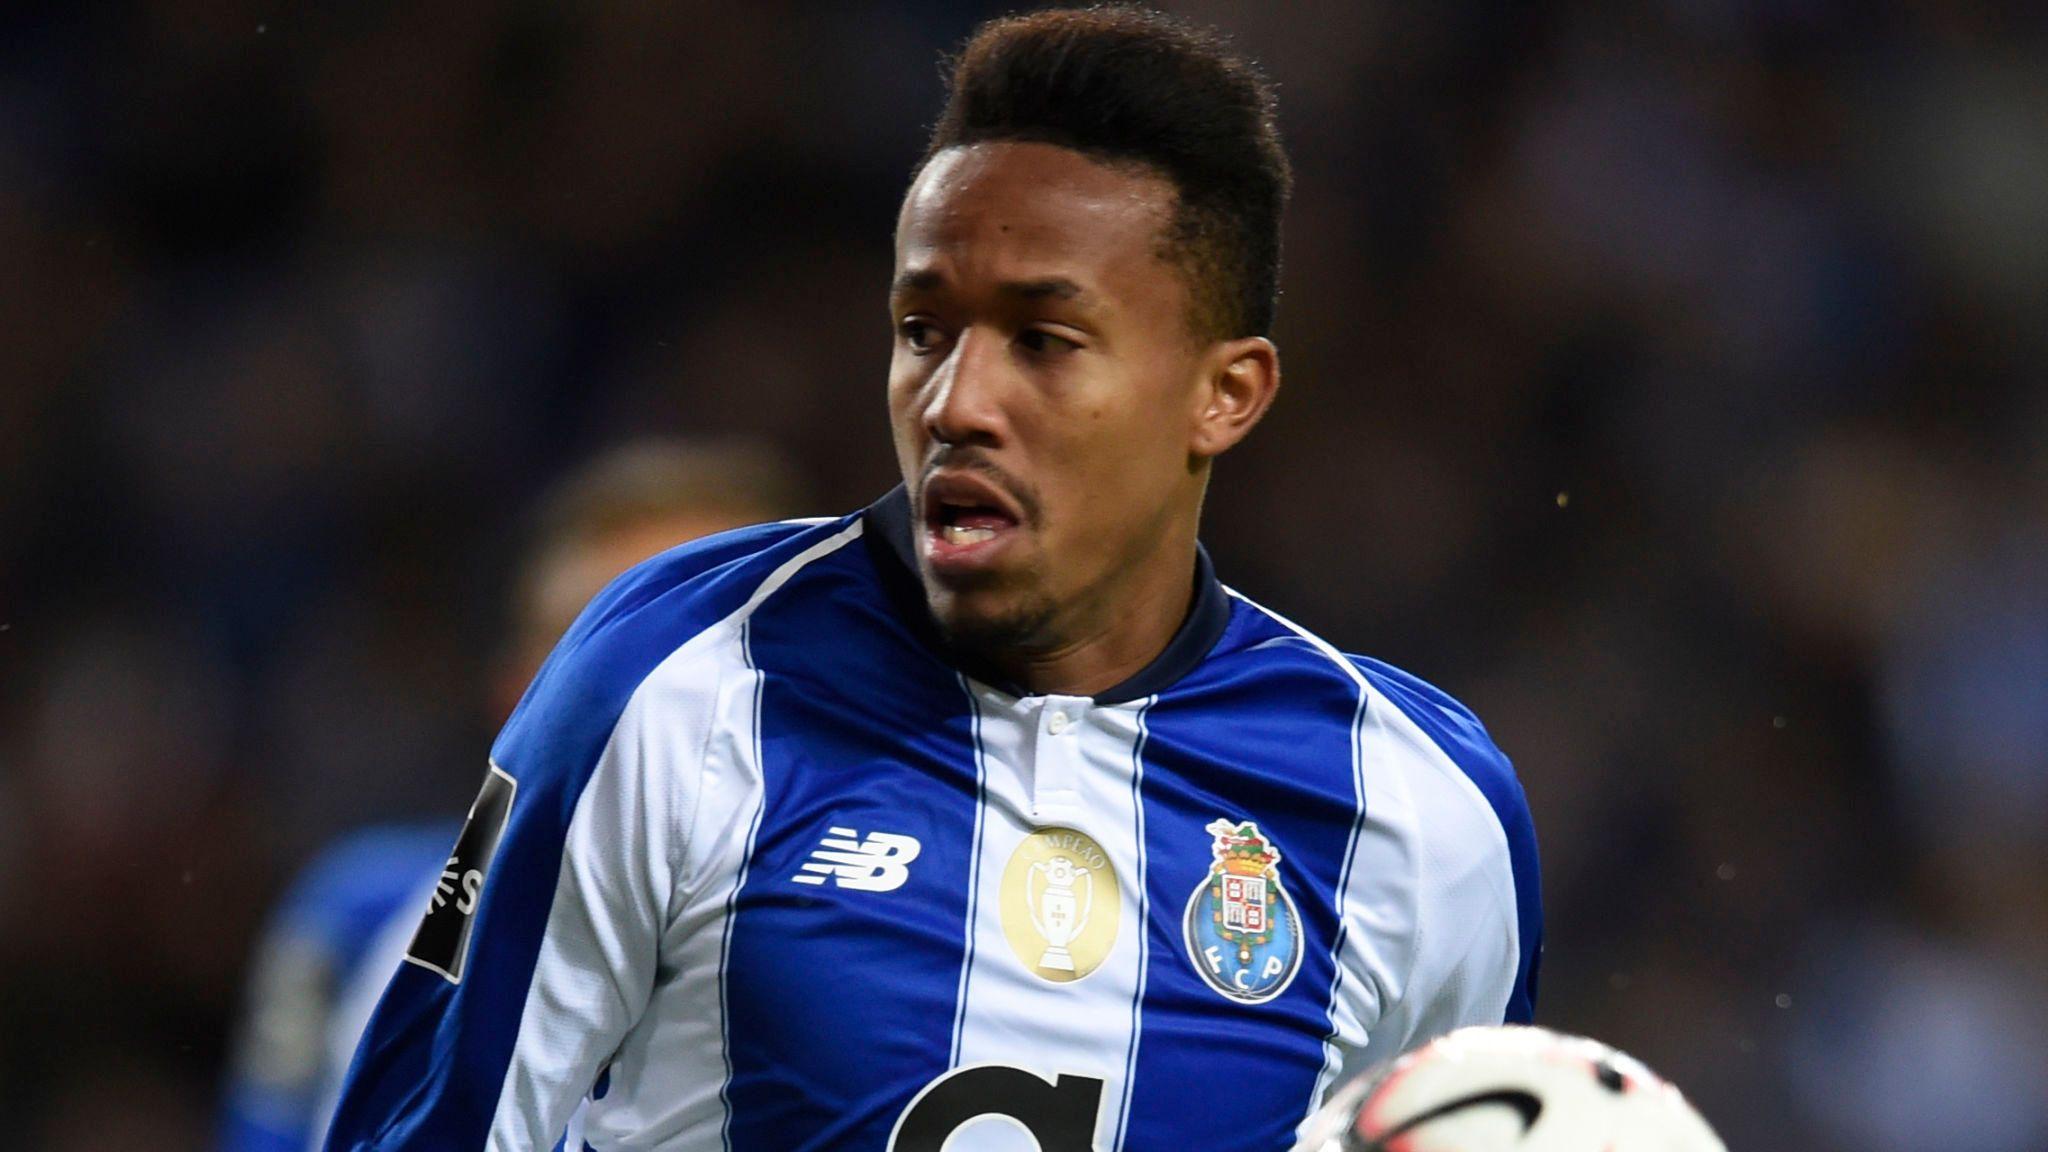 Eder Militao signs for Real Madrid from Porto. Football News